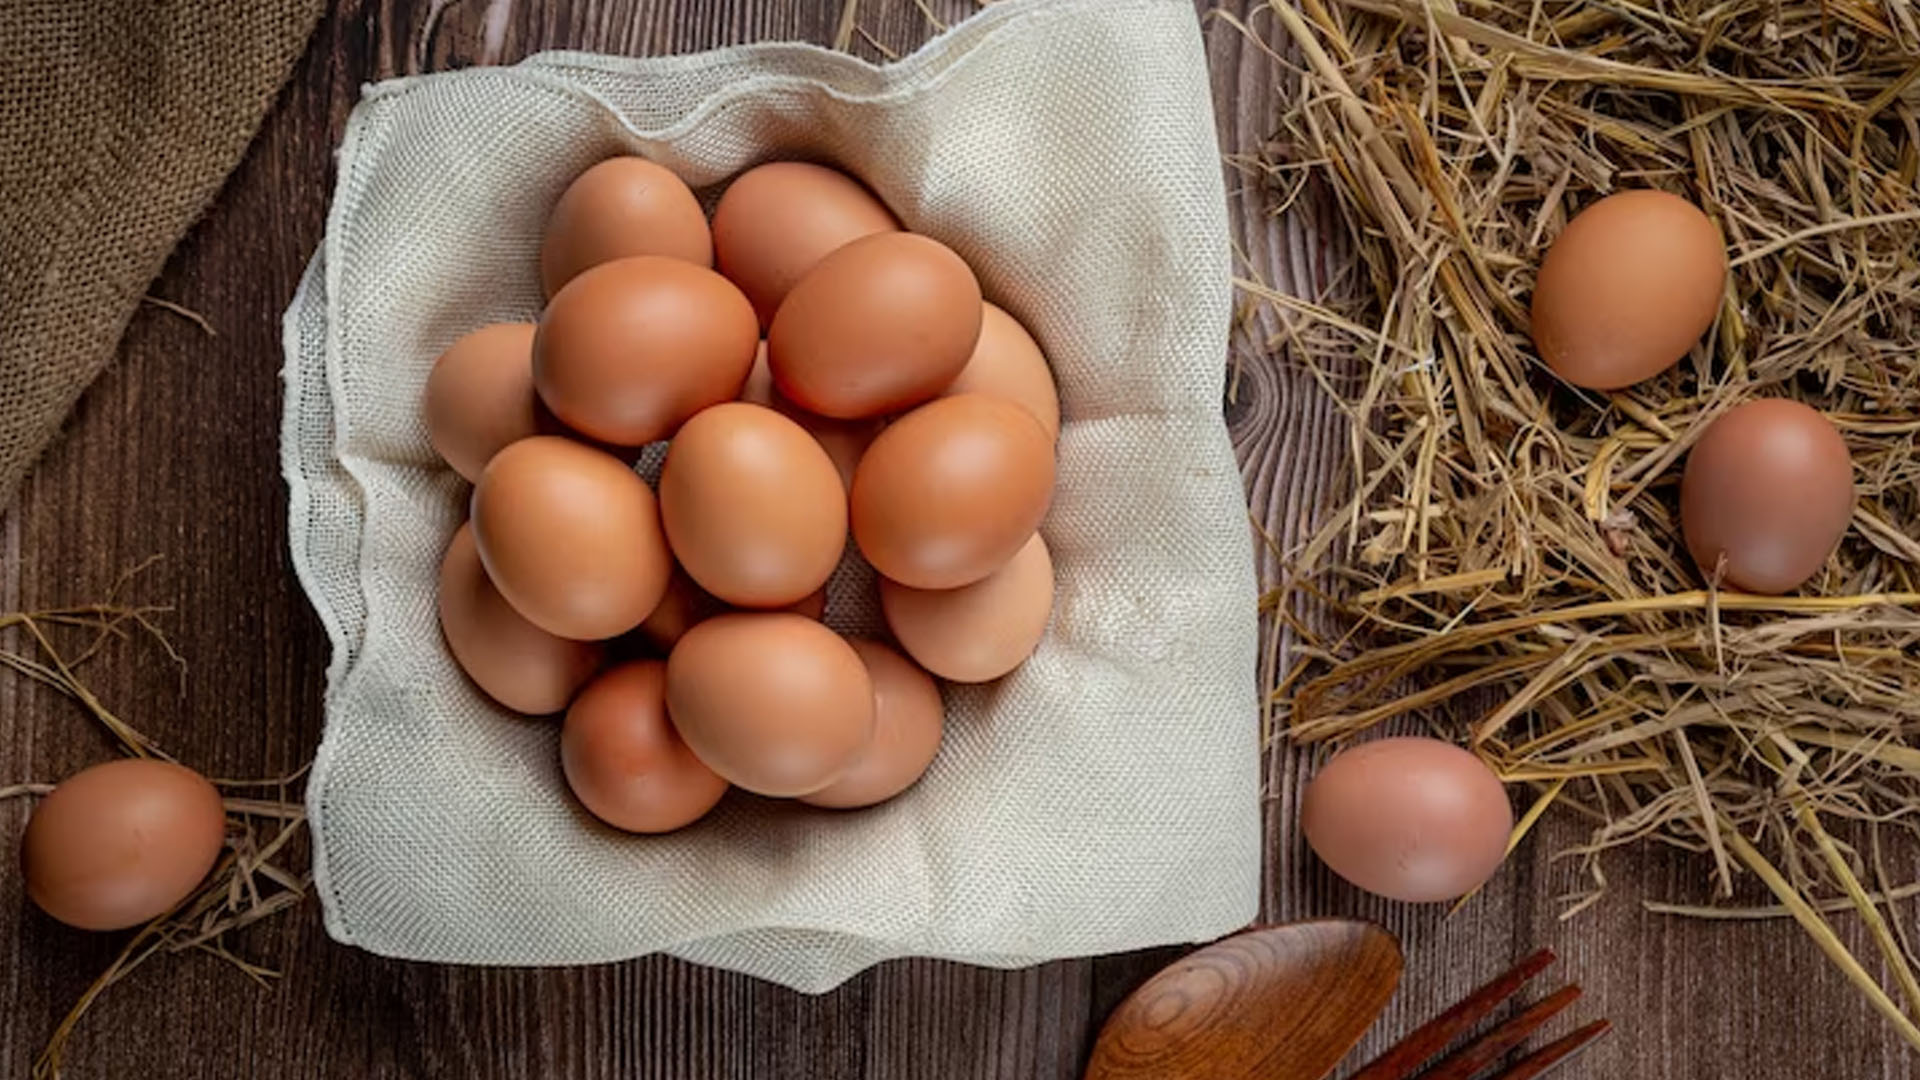 What Are The Health Benefits of Eating Raw Eggs?